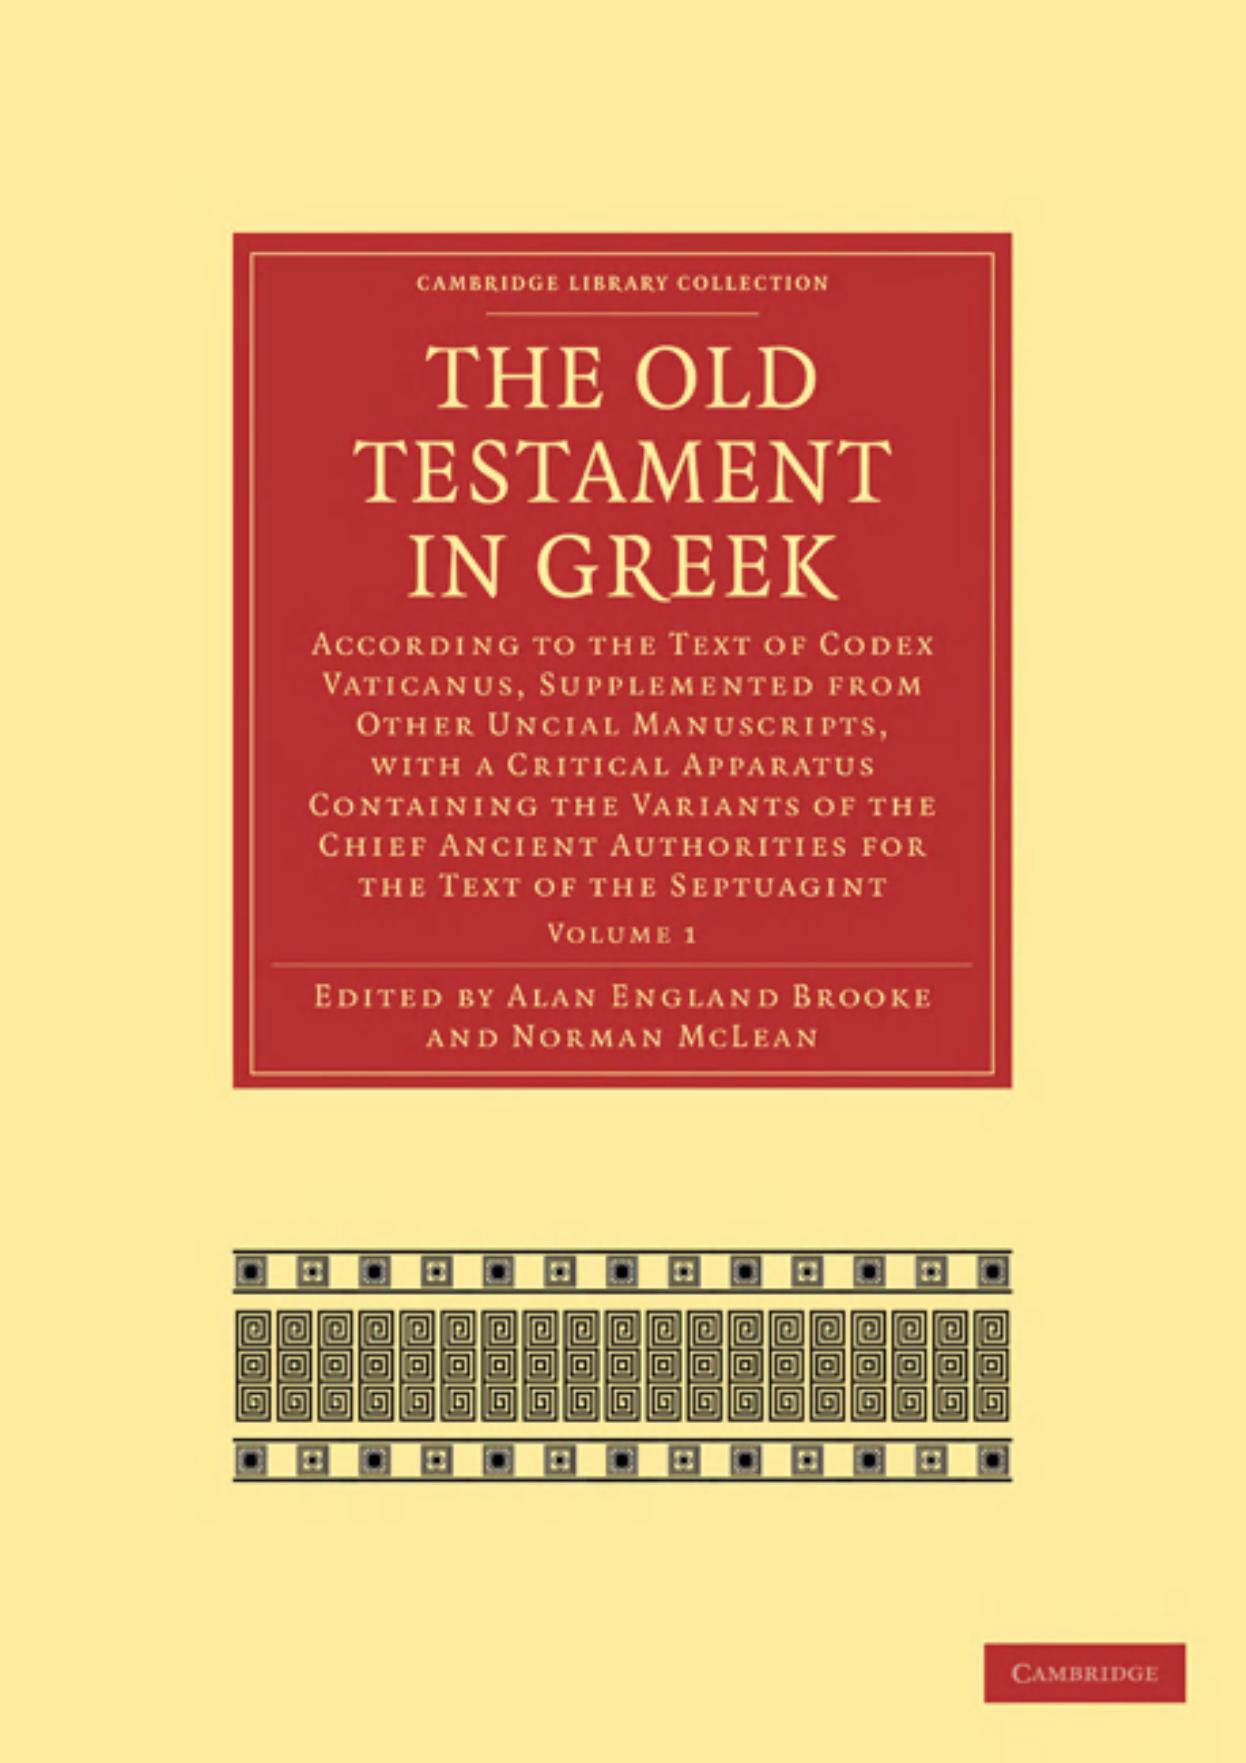 The Old Testament in Greek: According to the Text of Codex Vaticanus, Supplemented From Other Uncial Manuscripts, With a Critical Apparatus Containing the Variants of the Chief Ancient Authorities for the Text of the Septuagint